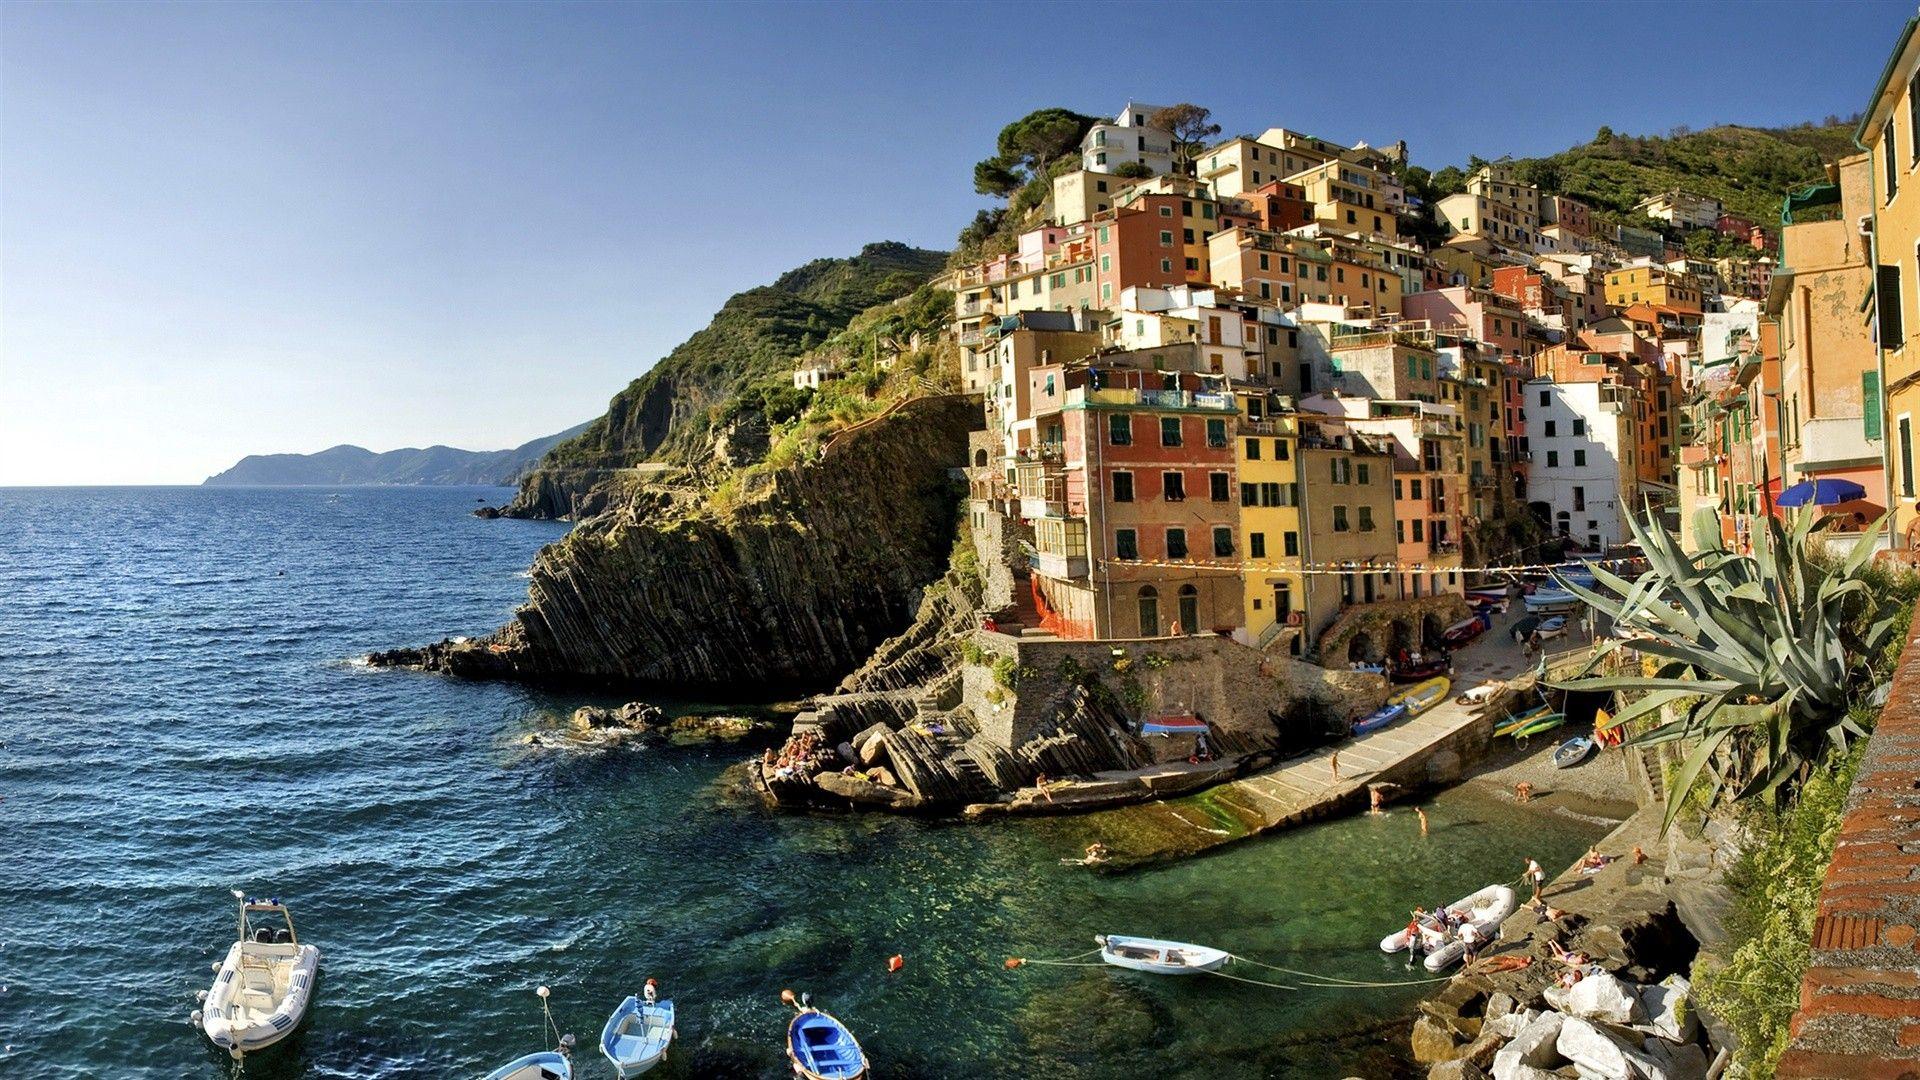 Download Wallpaper 1920x1080 italy, beach, boats, houses Full HD